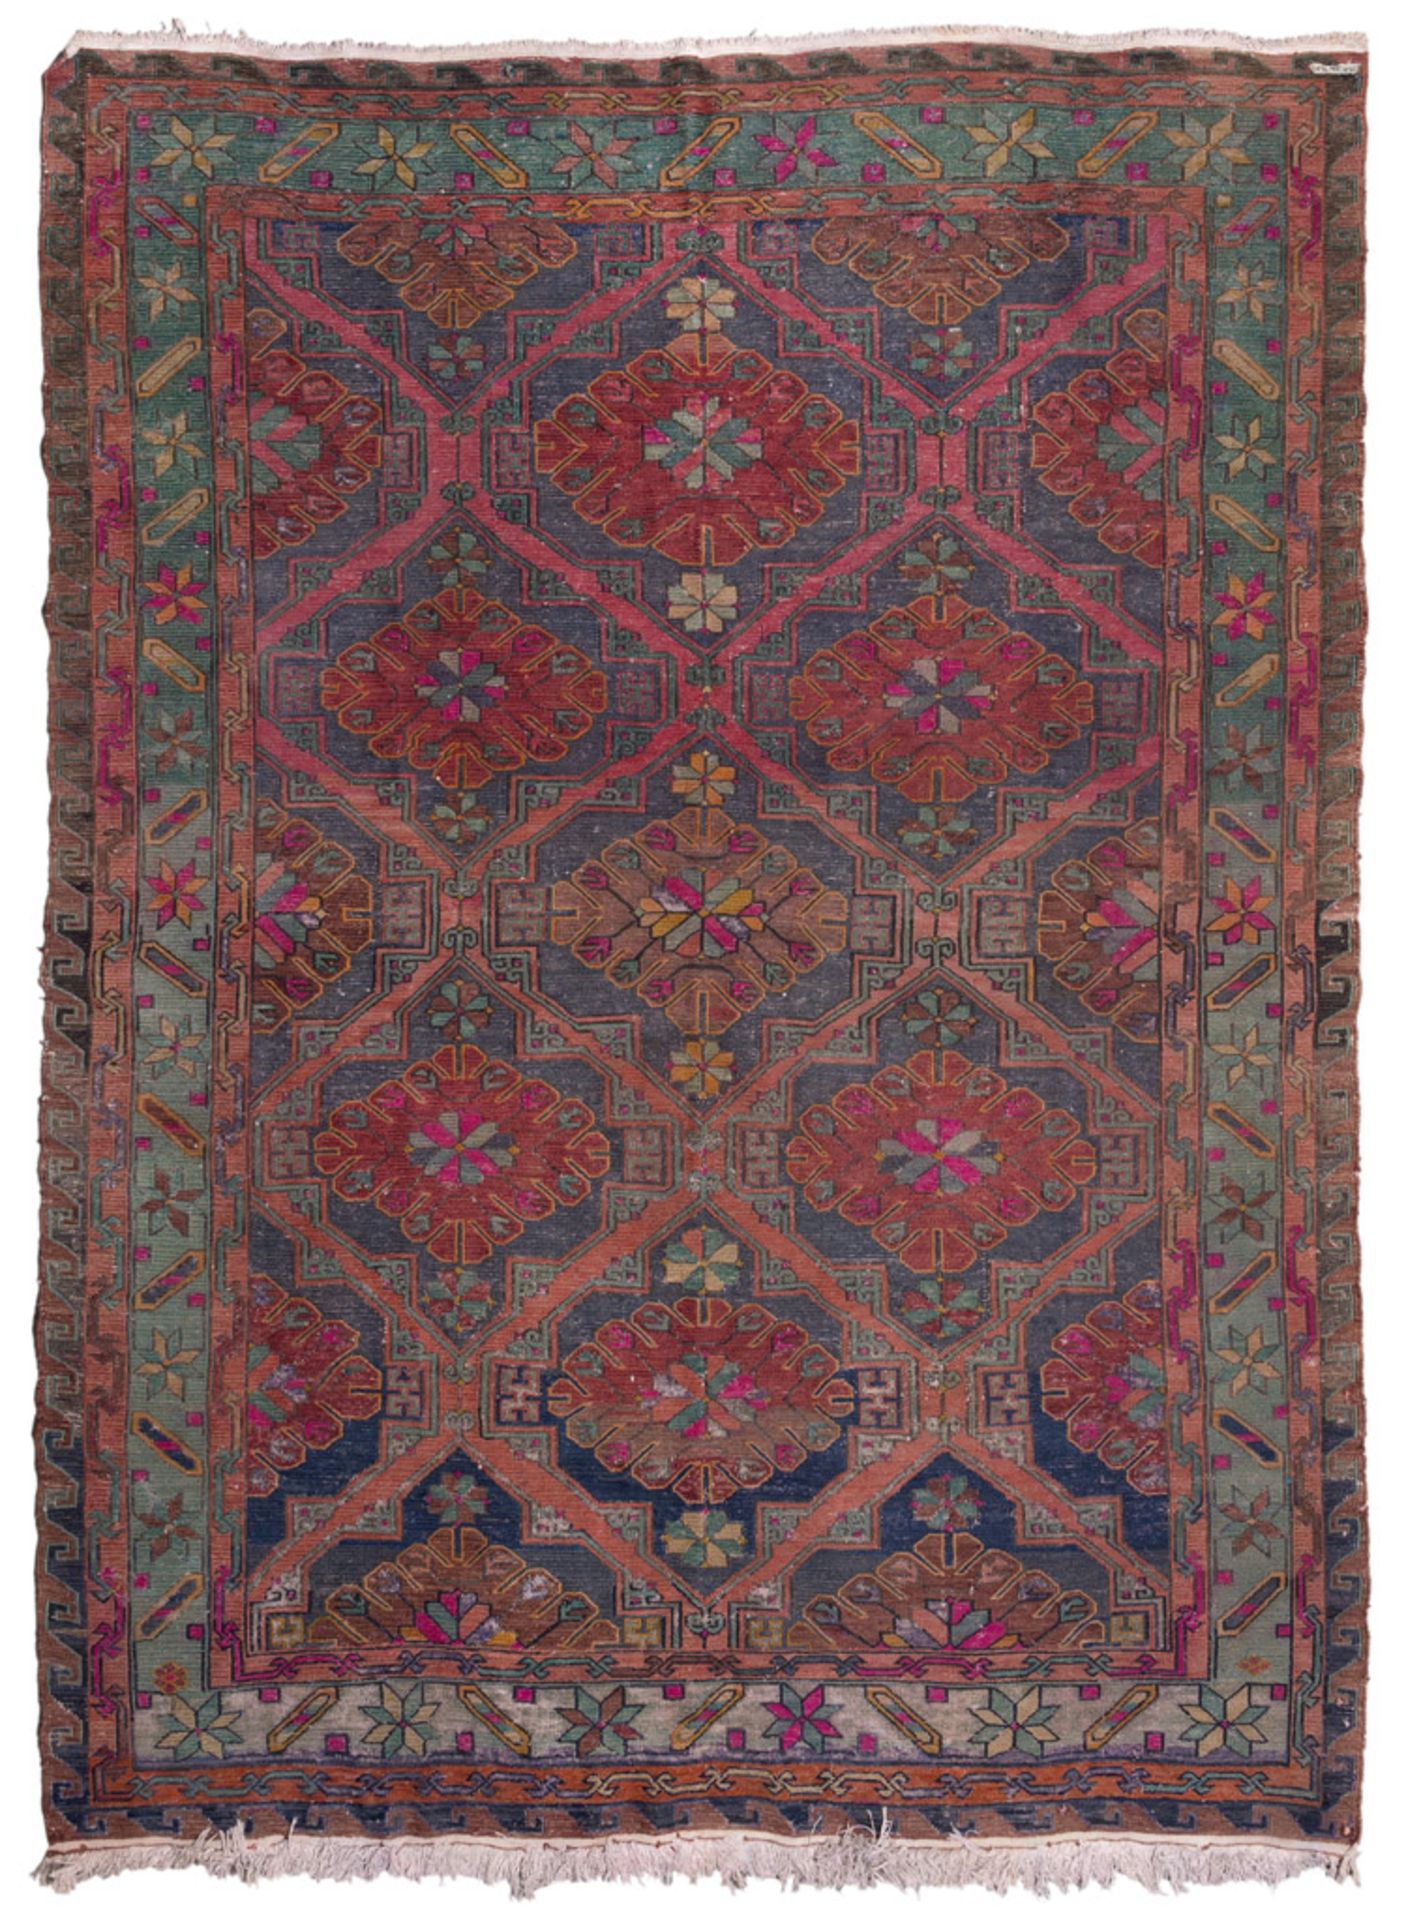 RARE SOUMAK CARPET, EARLY 20TH CENTURY with rhomboidal medallions to flowers in sequence, in the